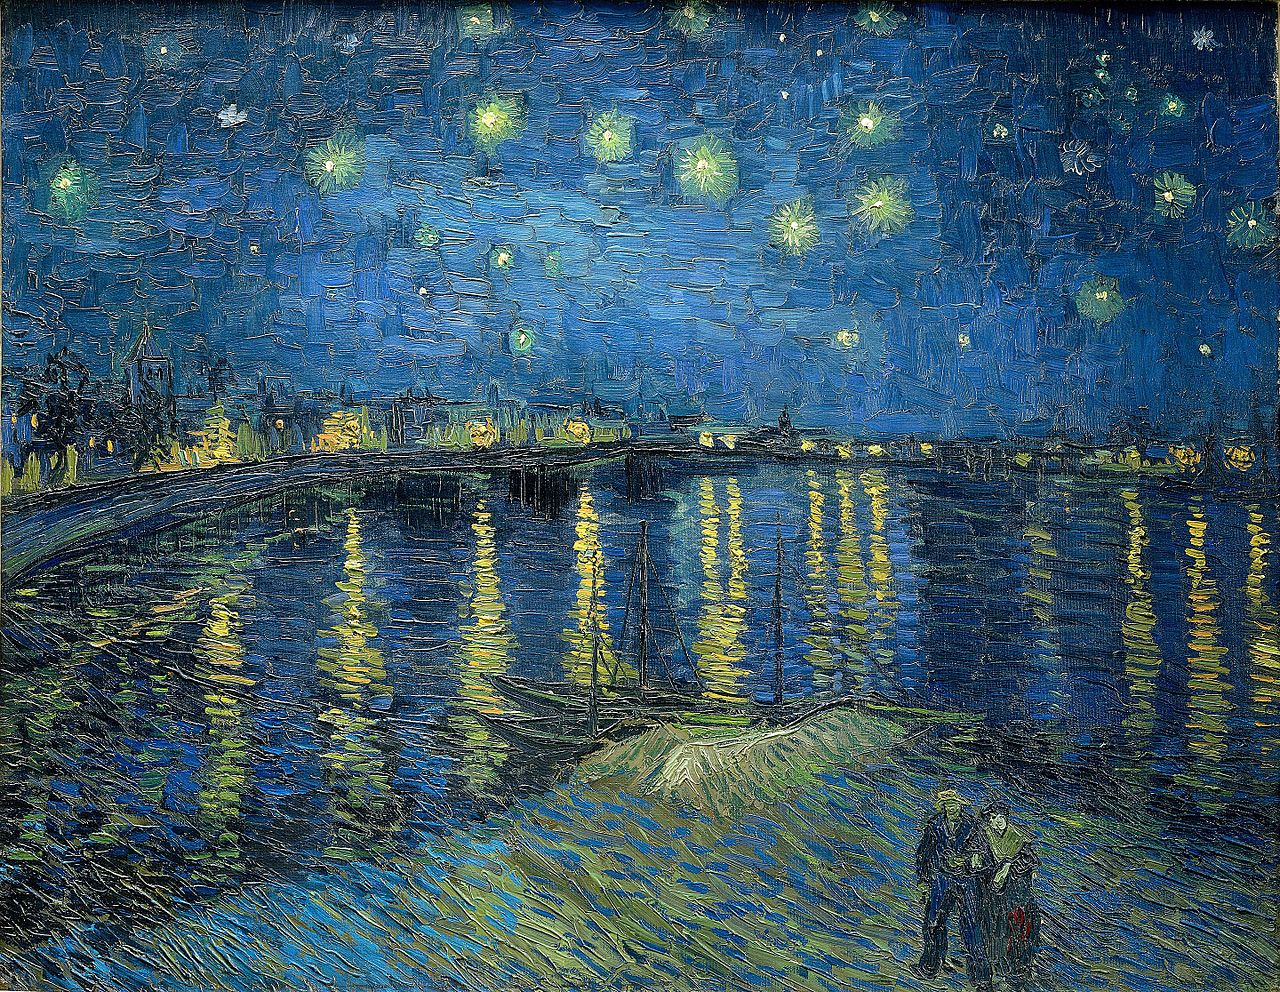 images/Starry_Night_Over_the_Rhone.jpg